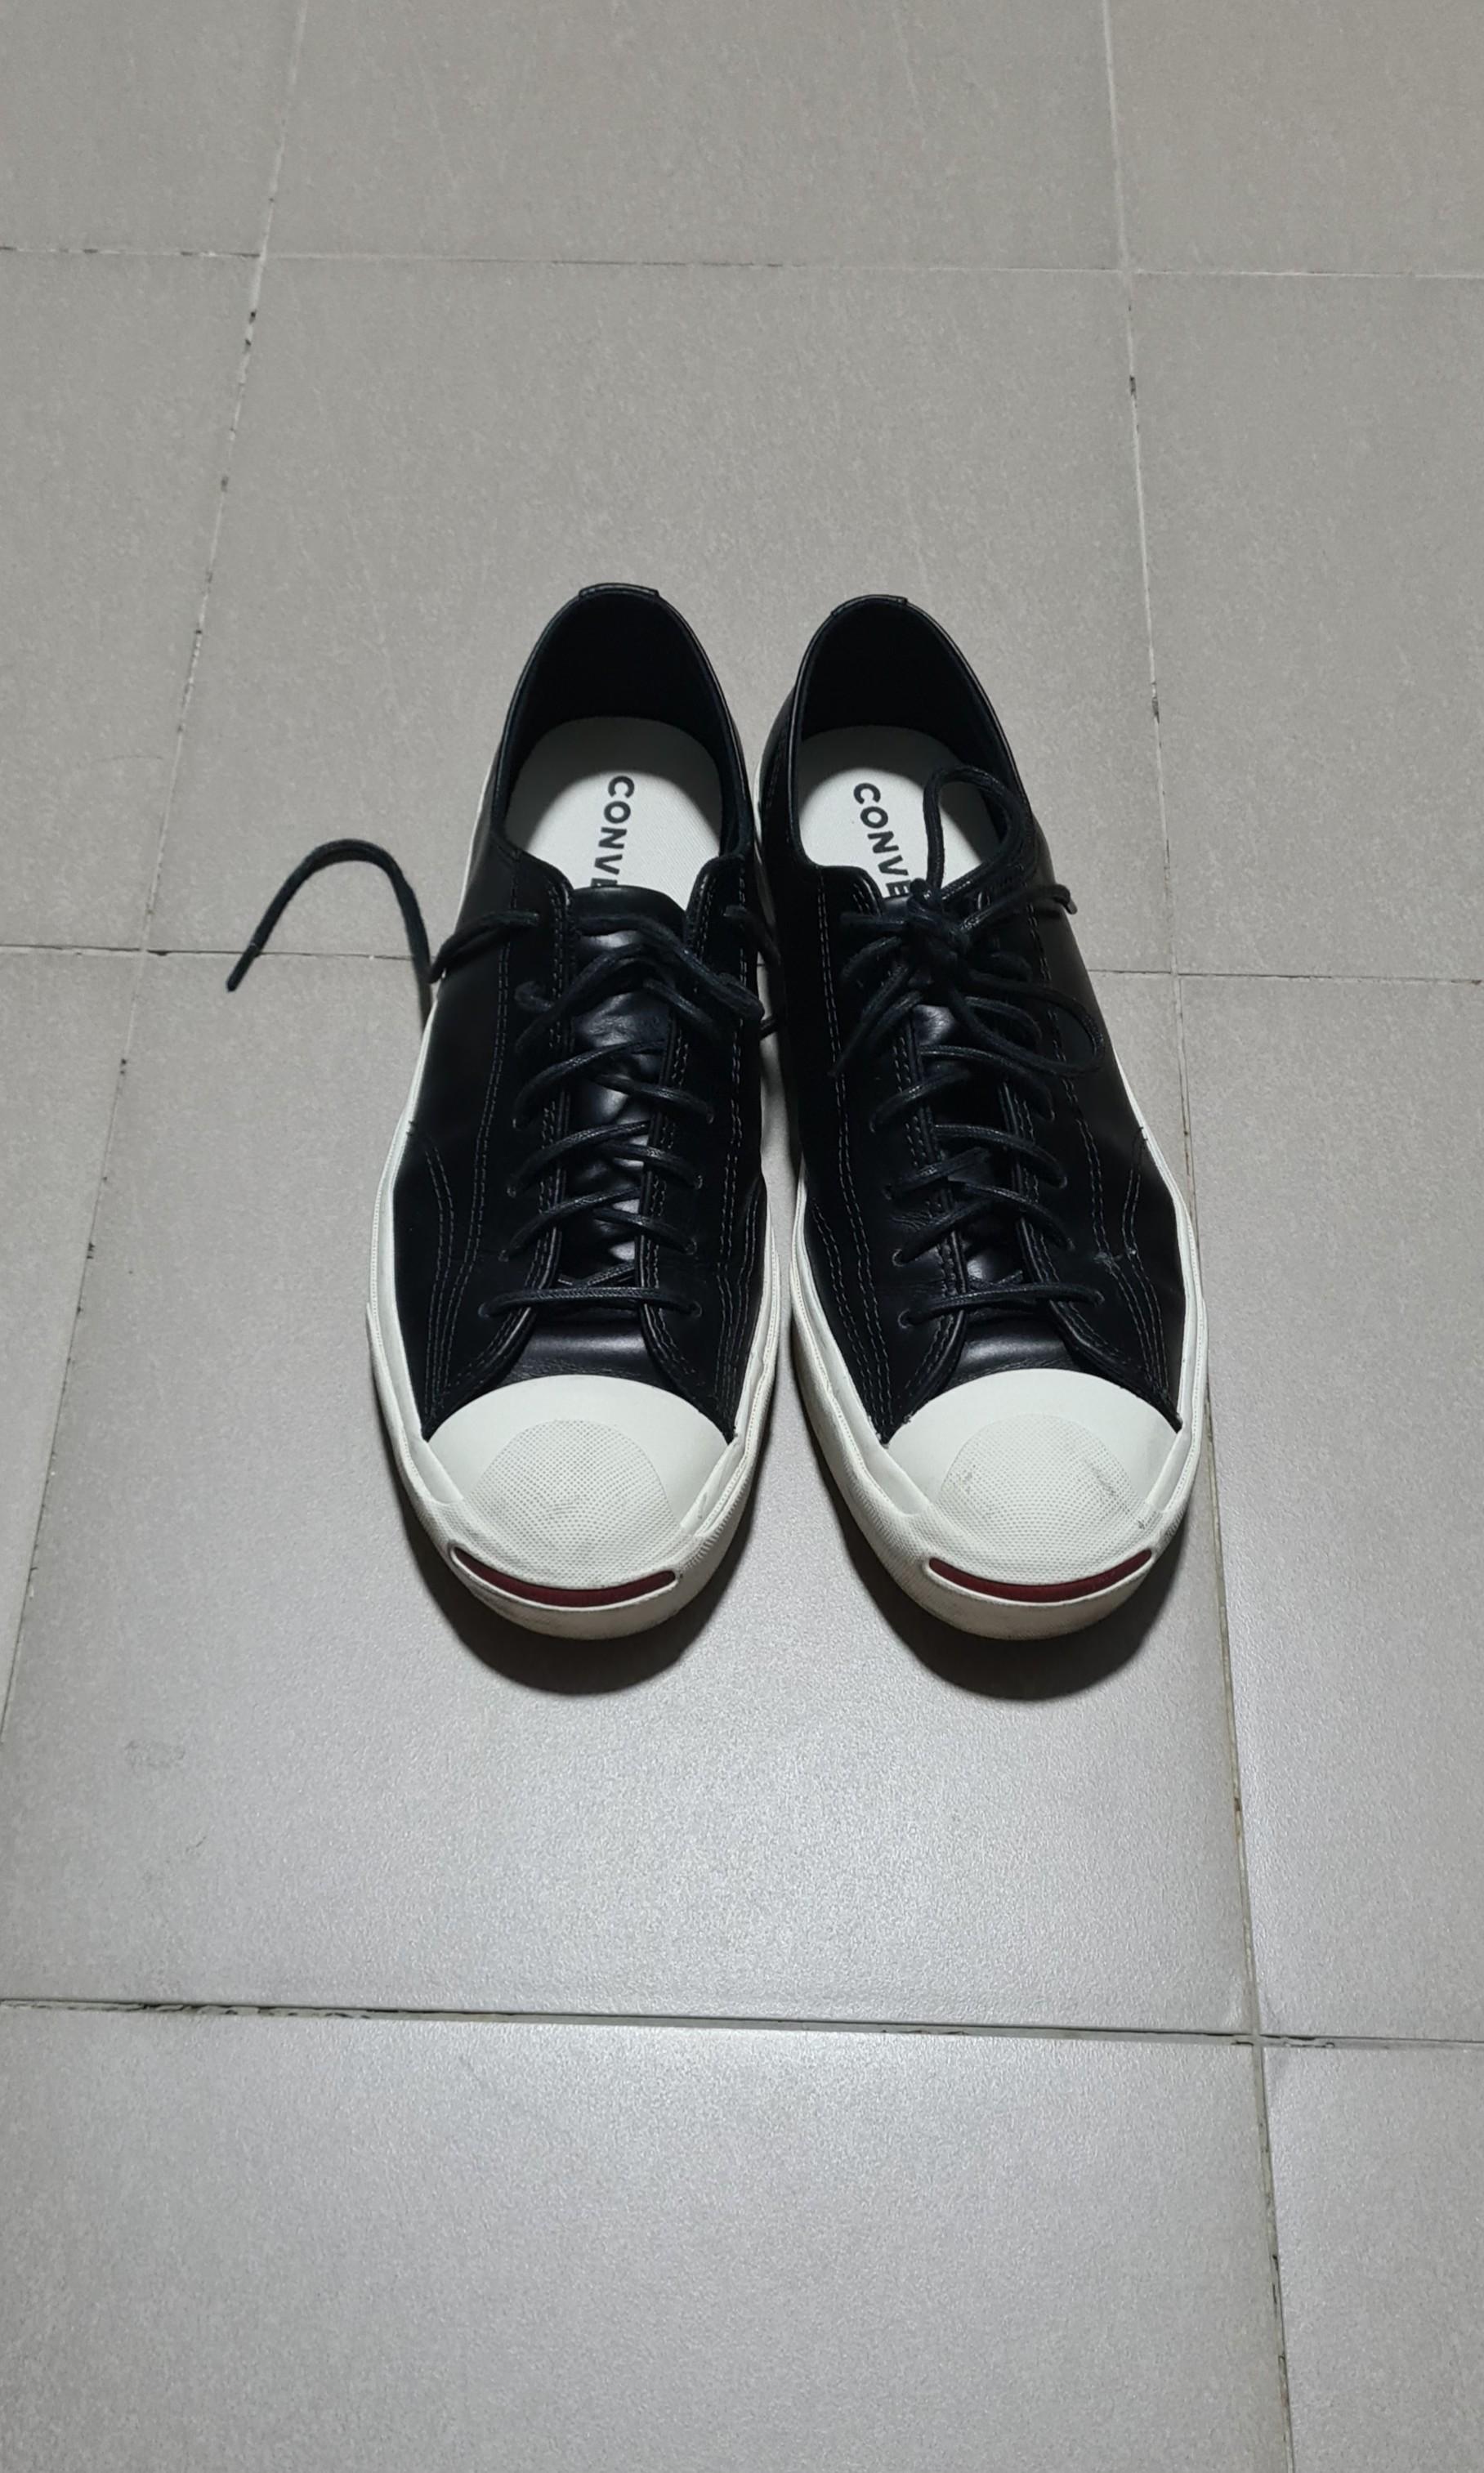 Grisling skjold Individualitet Converse Jack Purcell Premium Leather - Ox - Black/Black/Egret - 170098C,  Men's Fashion, Footwear, Sneakers on Carousell